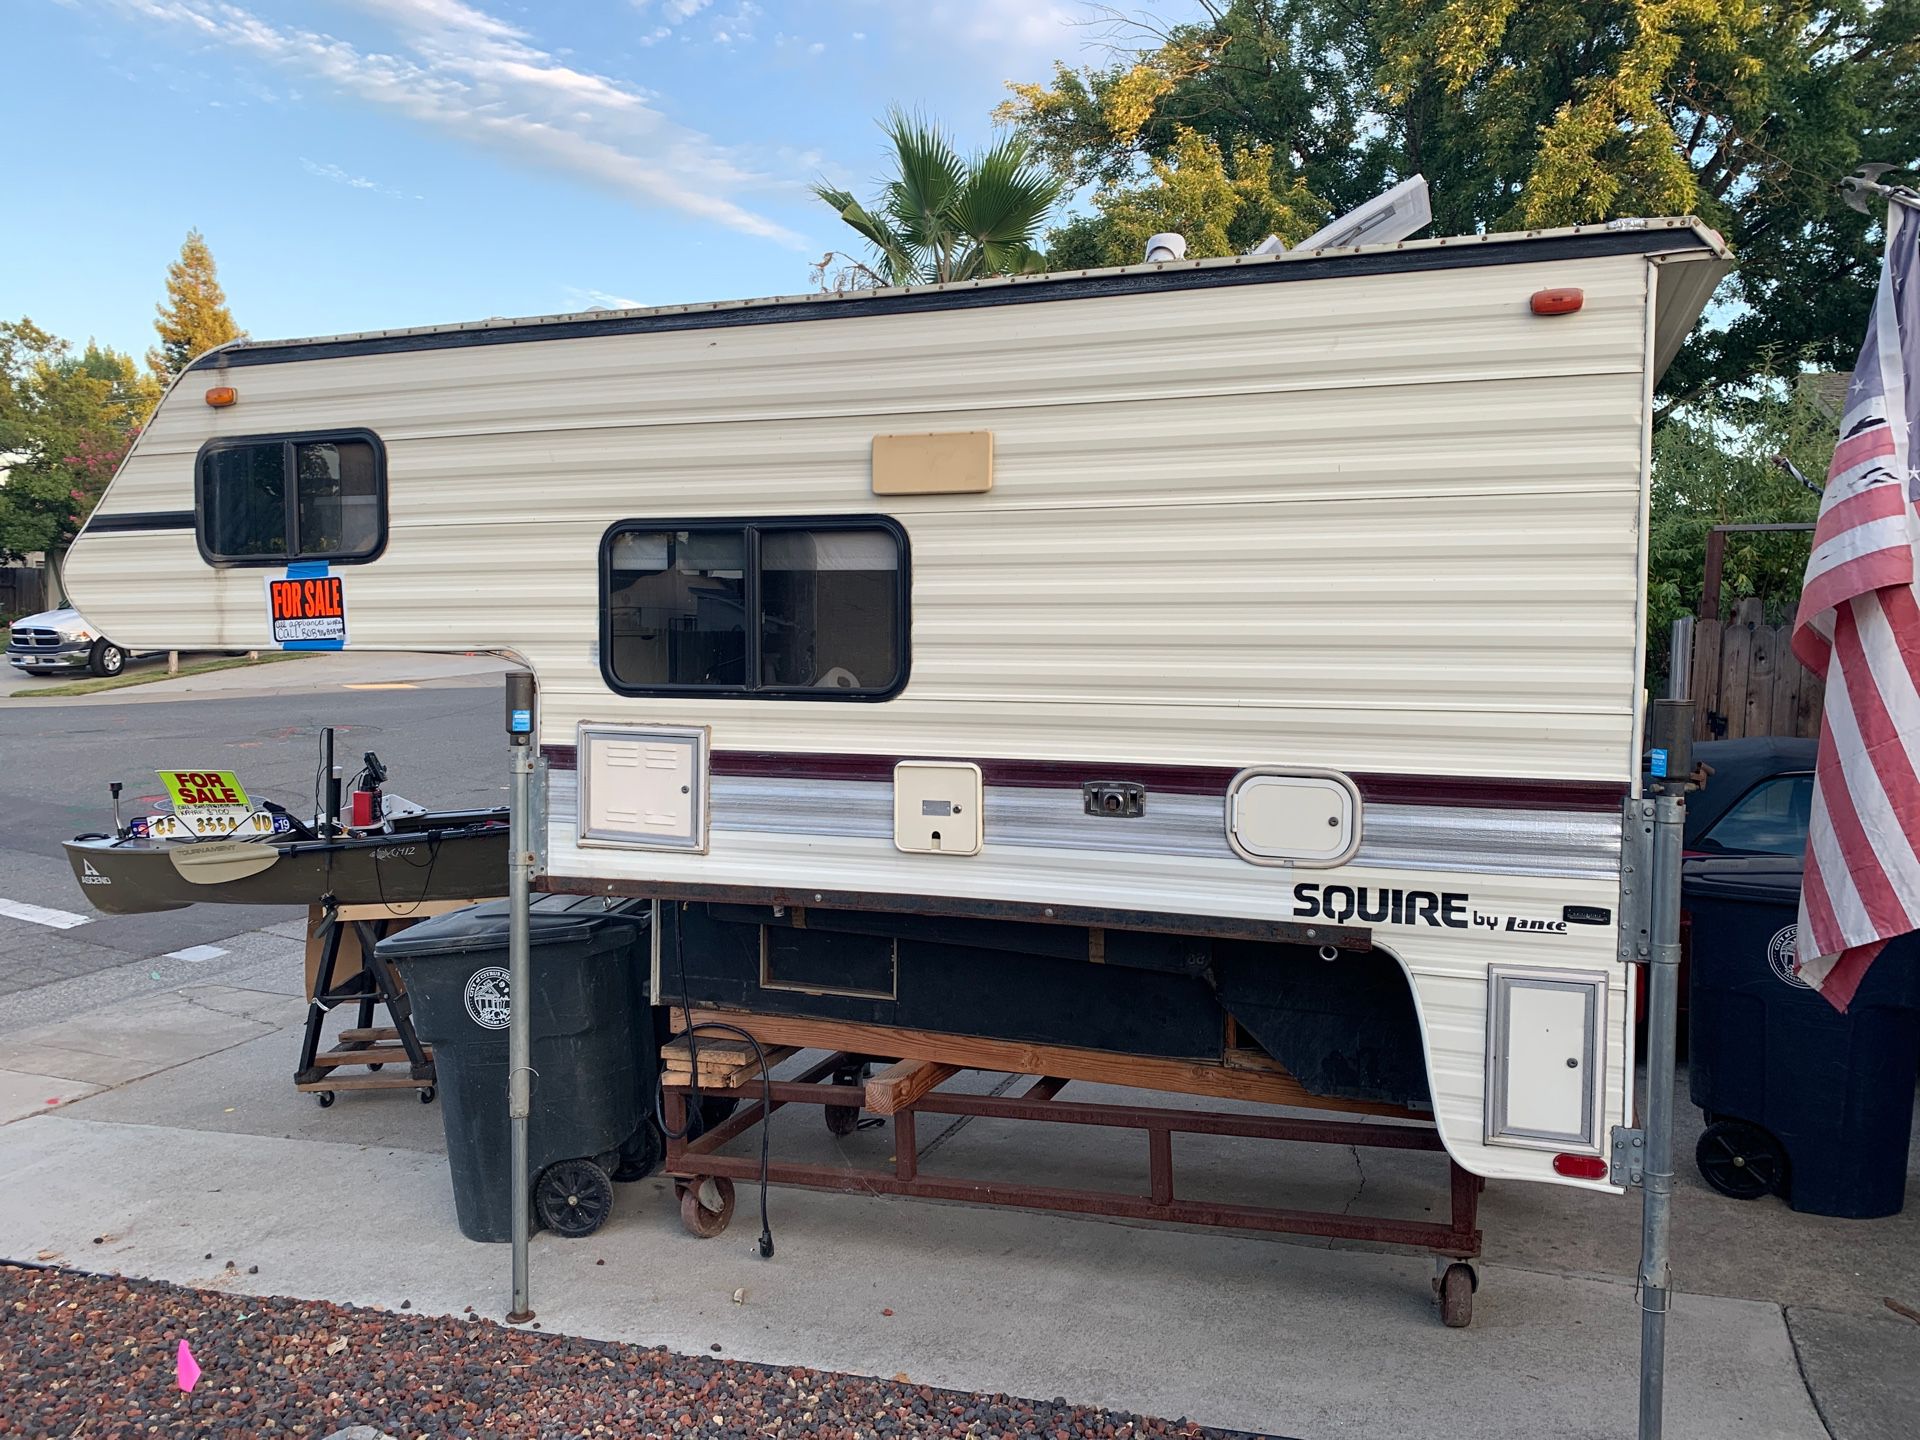 Squire by lance LS4000/9.4 camper